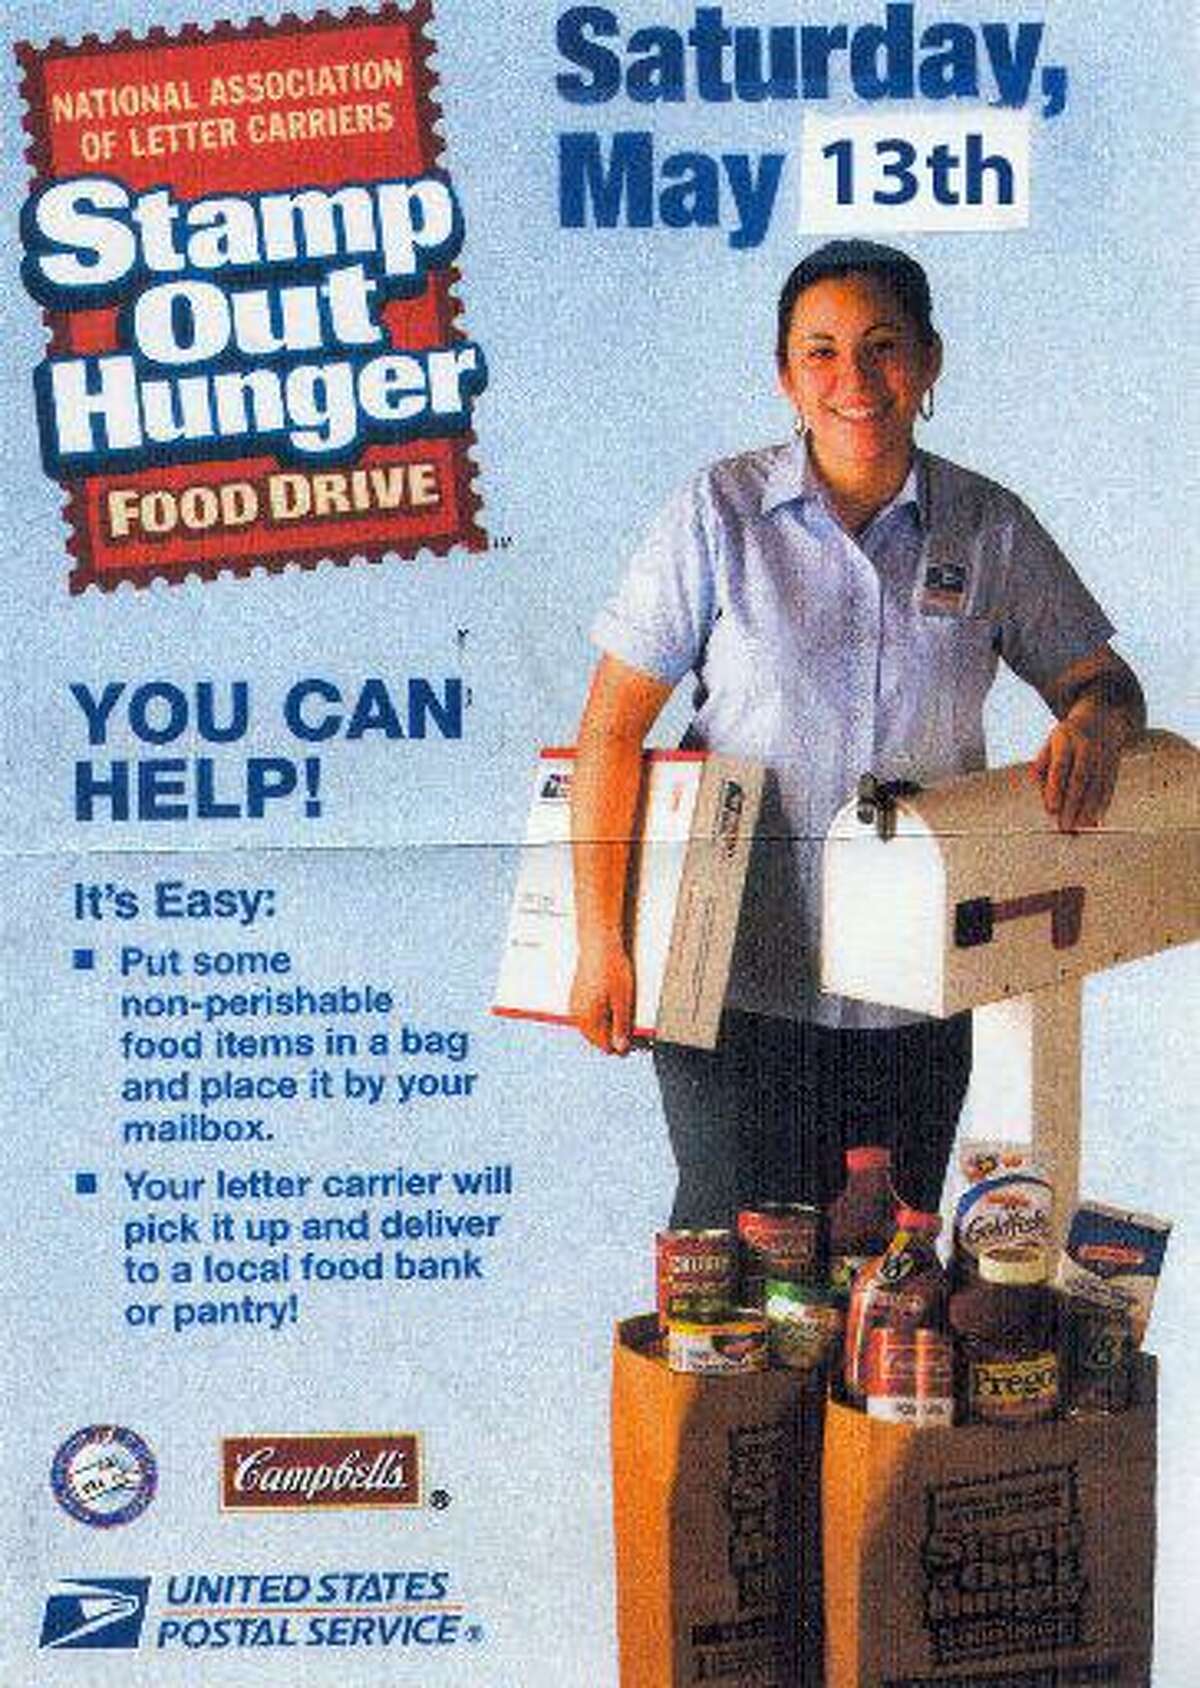 Annual mail carriers’ food drive set for May 13